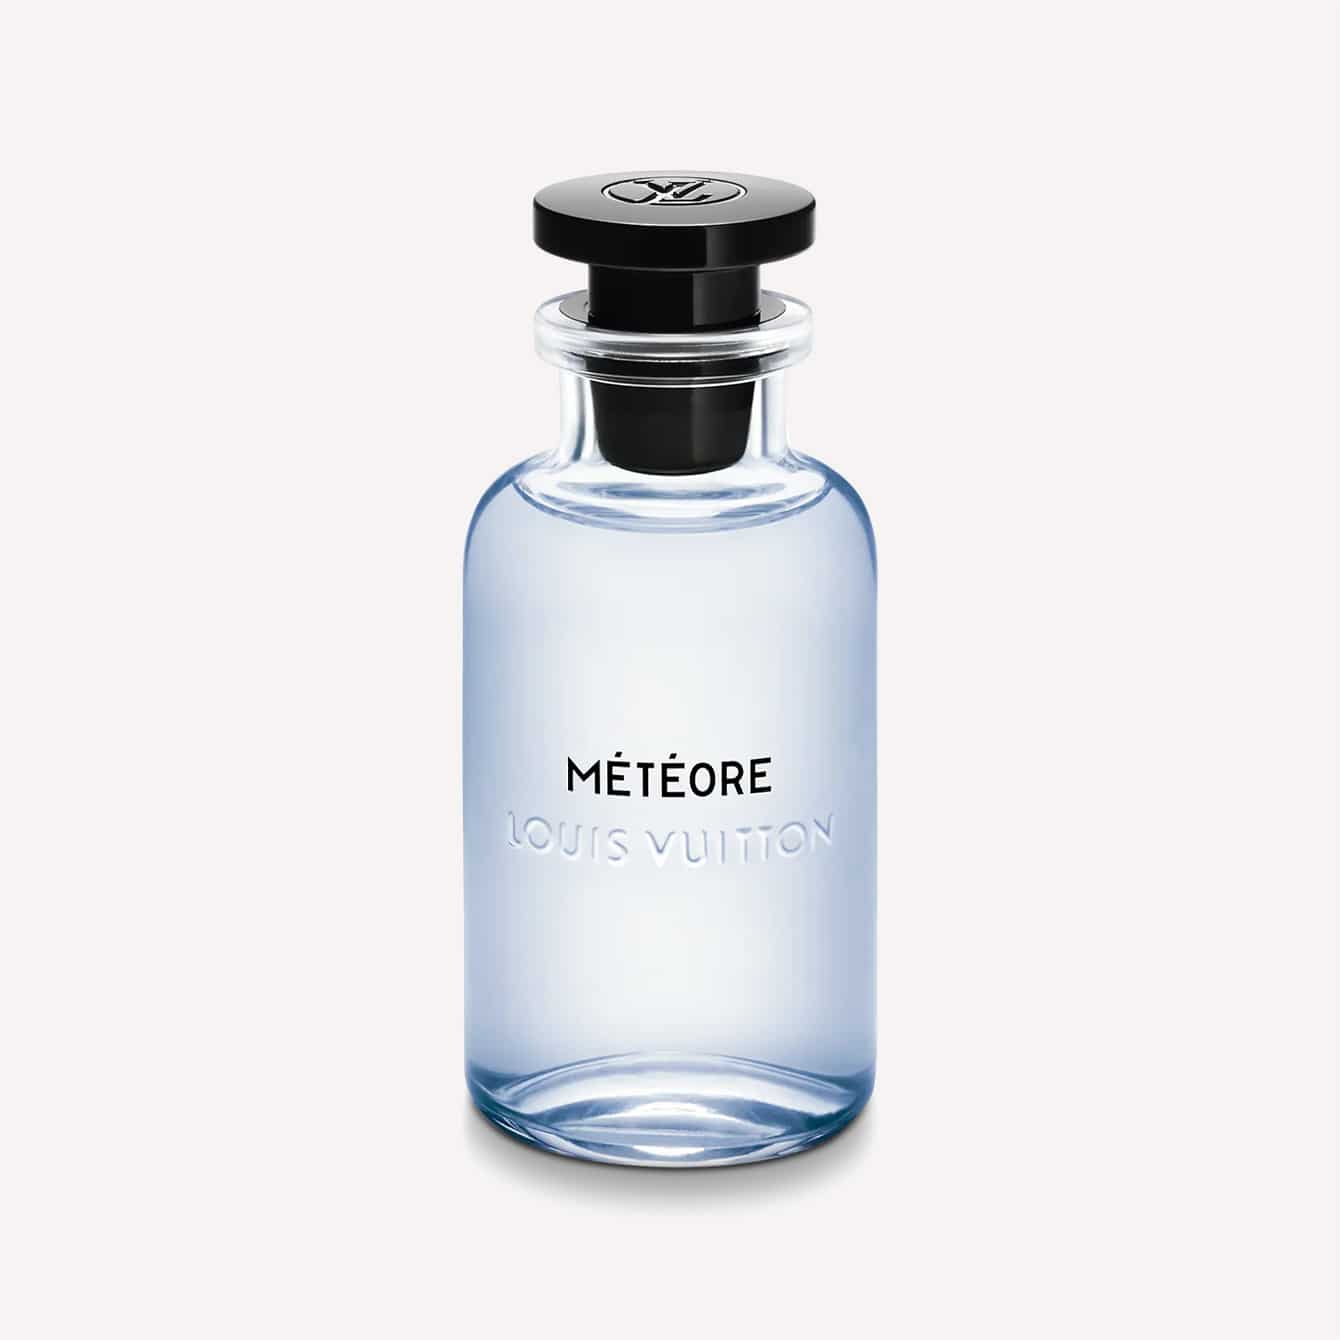 Louis Vuitton's New Colognes Smell Like Summer Swims And Cactus Gardens